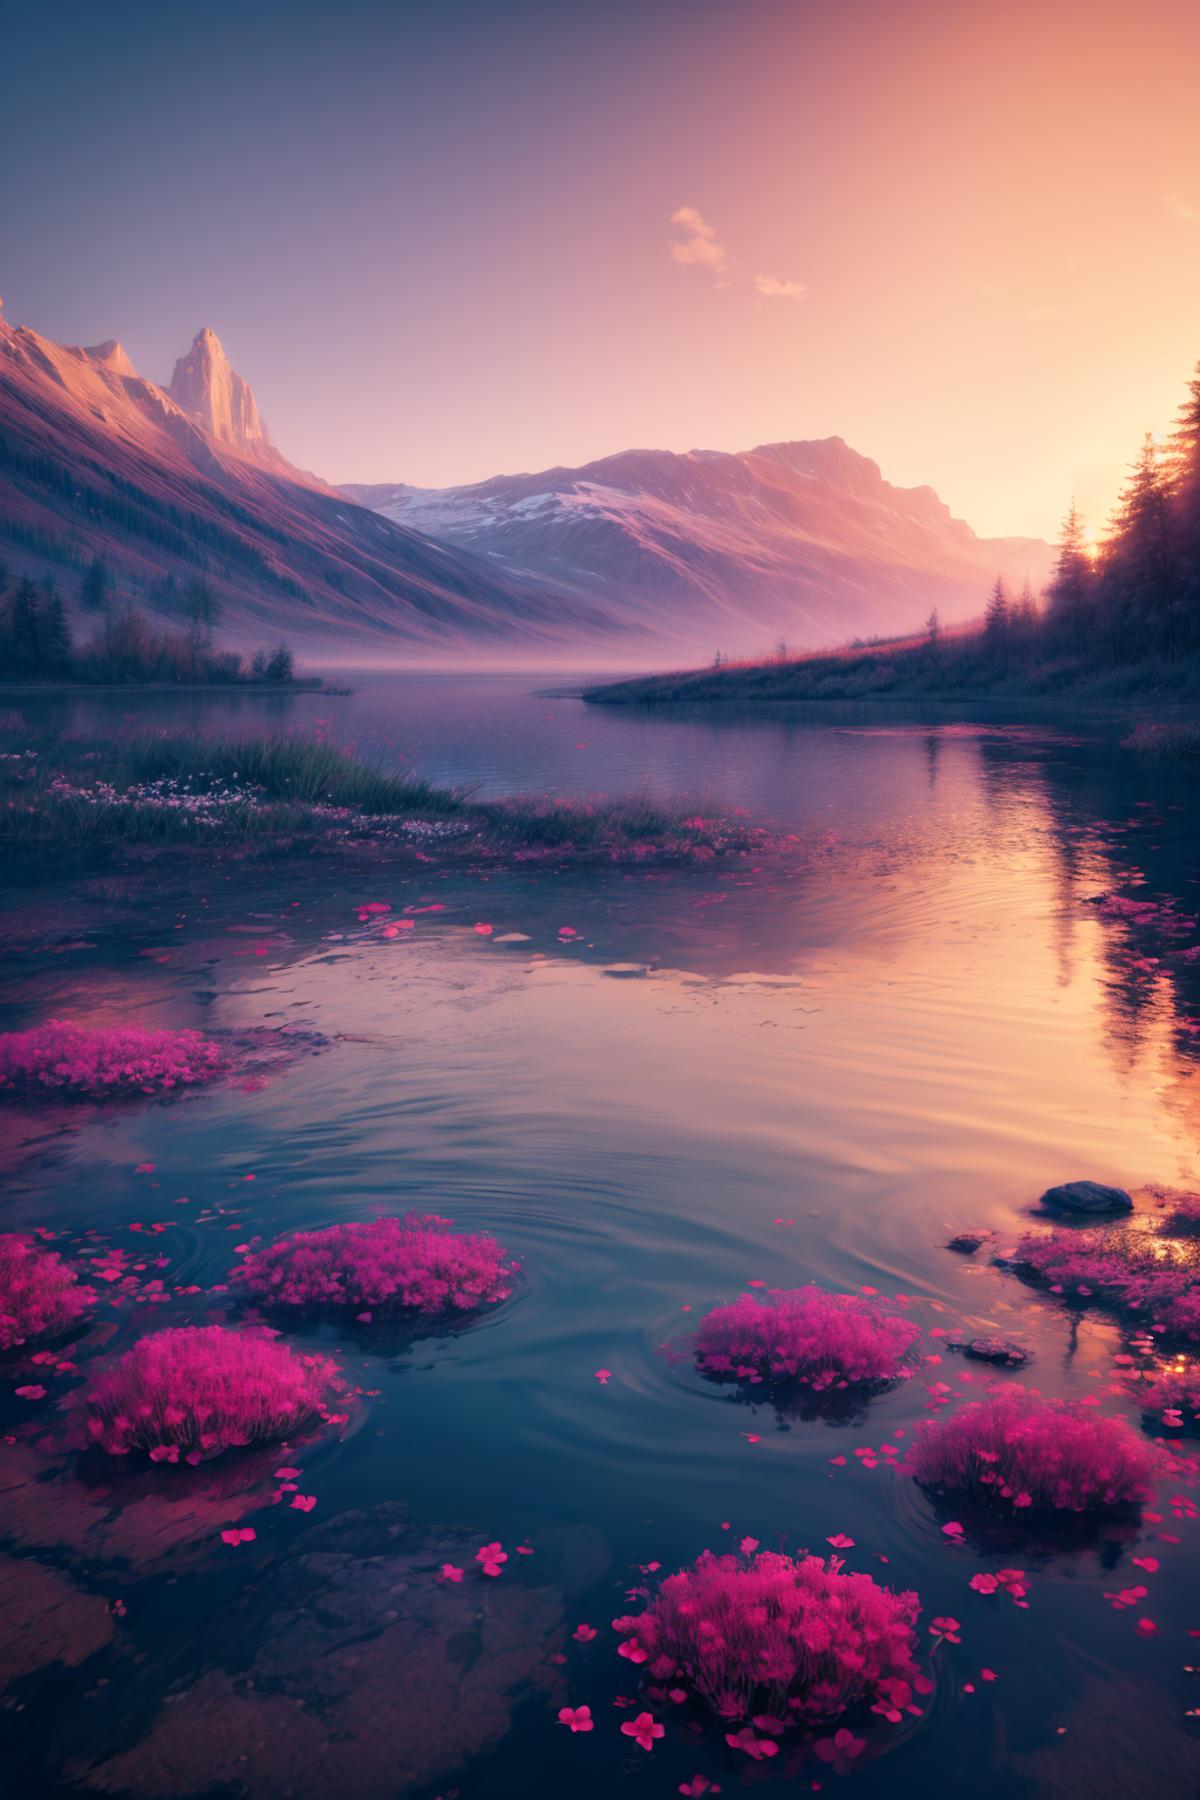 A serene scene of a large lake with mountains in the background, surrounded by purple flowers and trees.